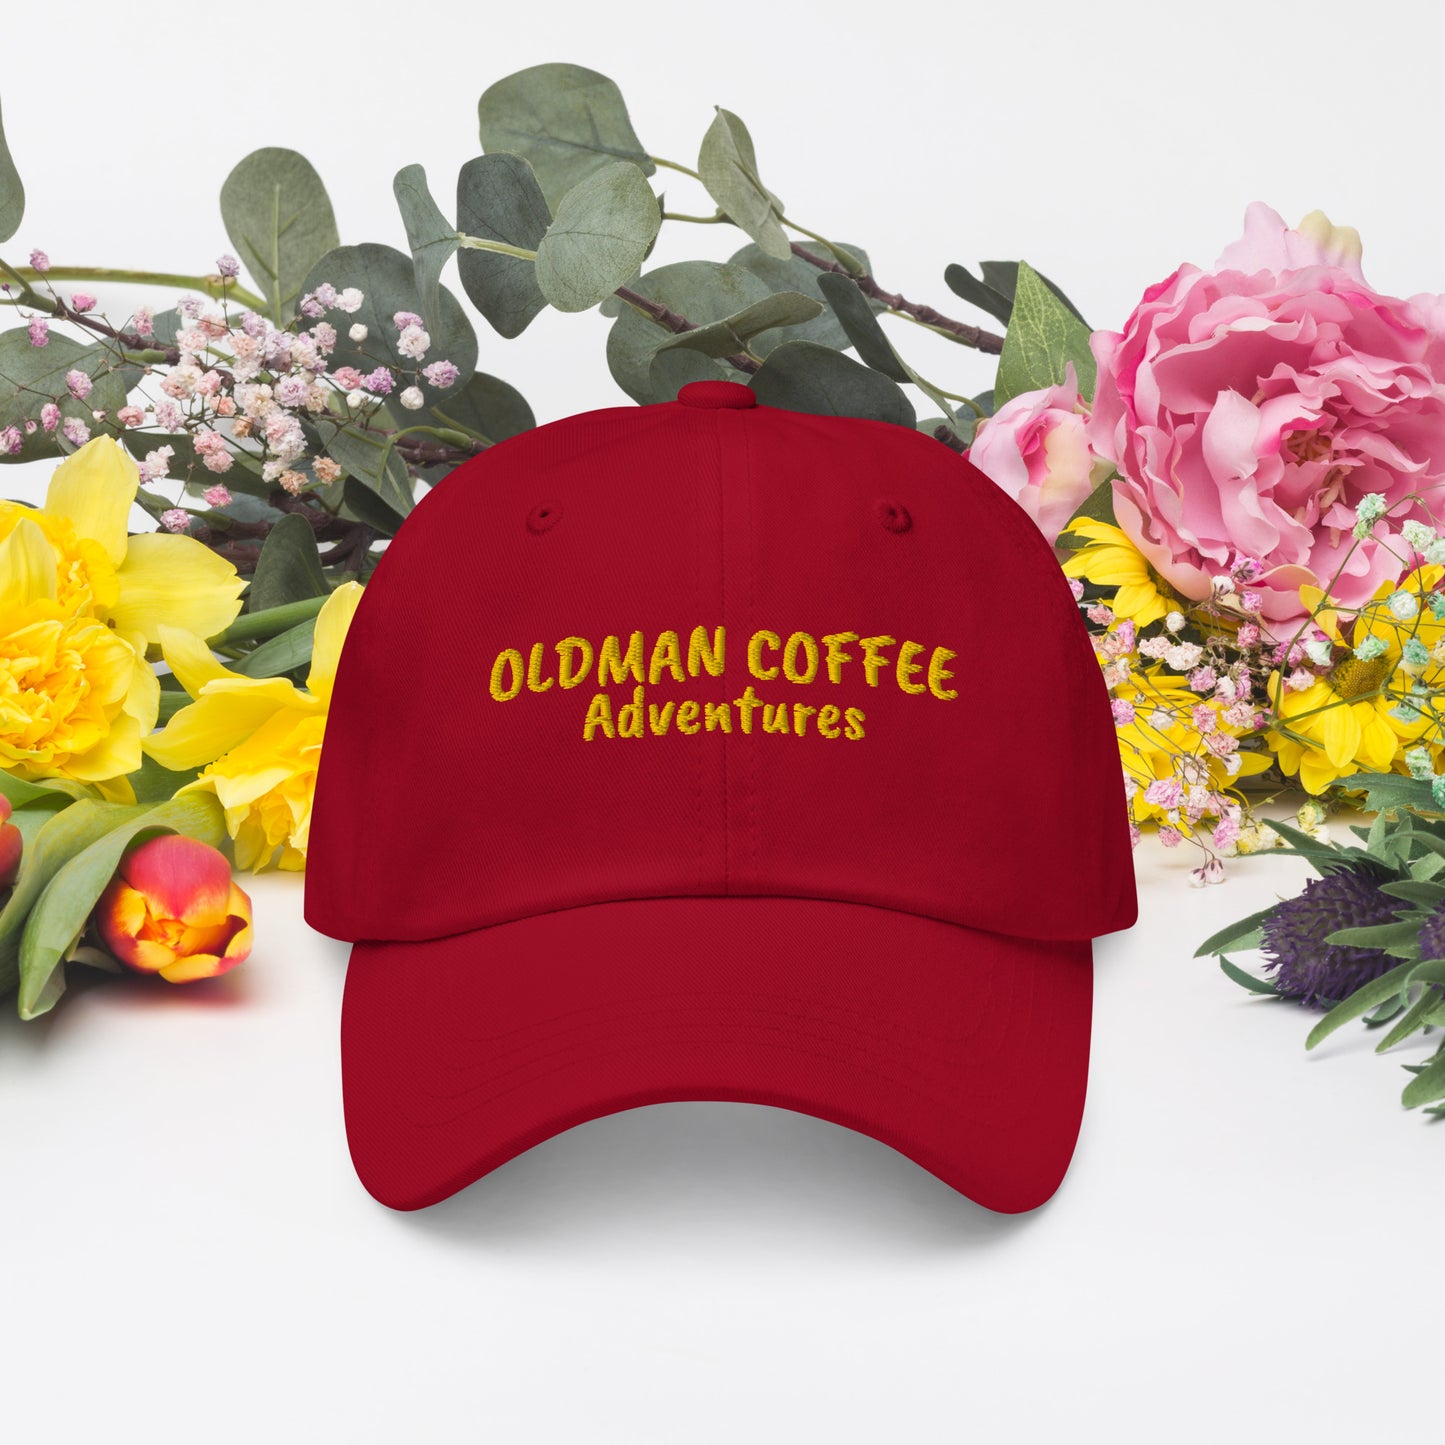 OLDMAN COFFEE Adventures--- FREE SHIPPING IN THE US